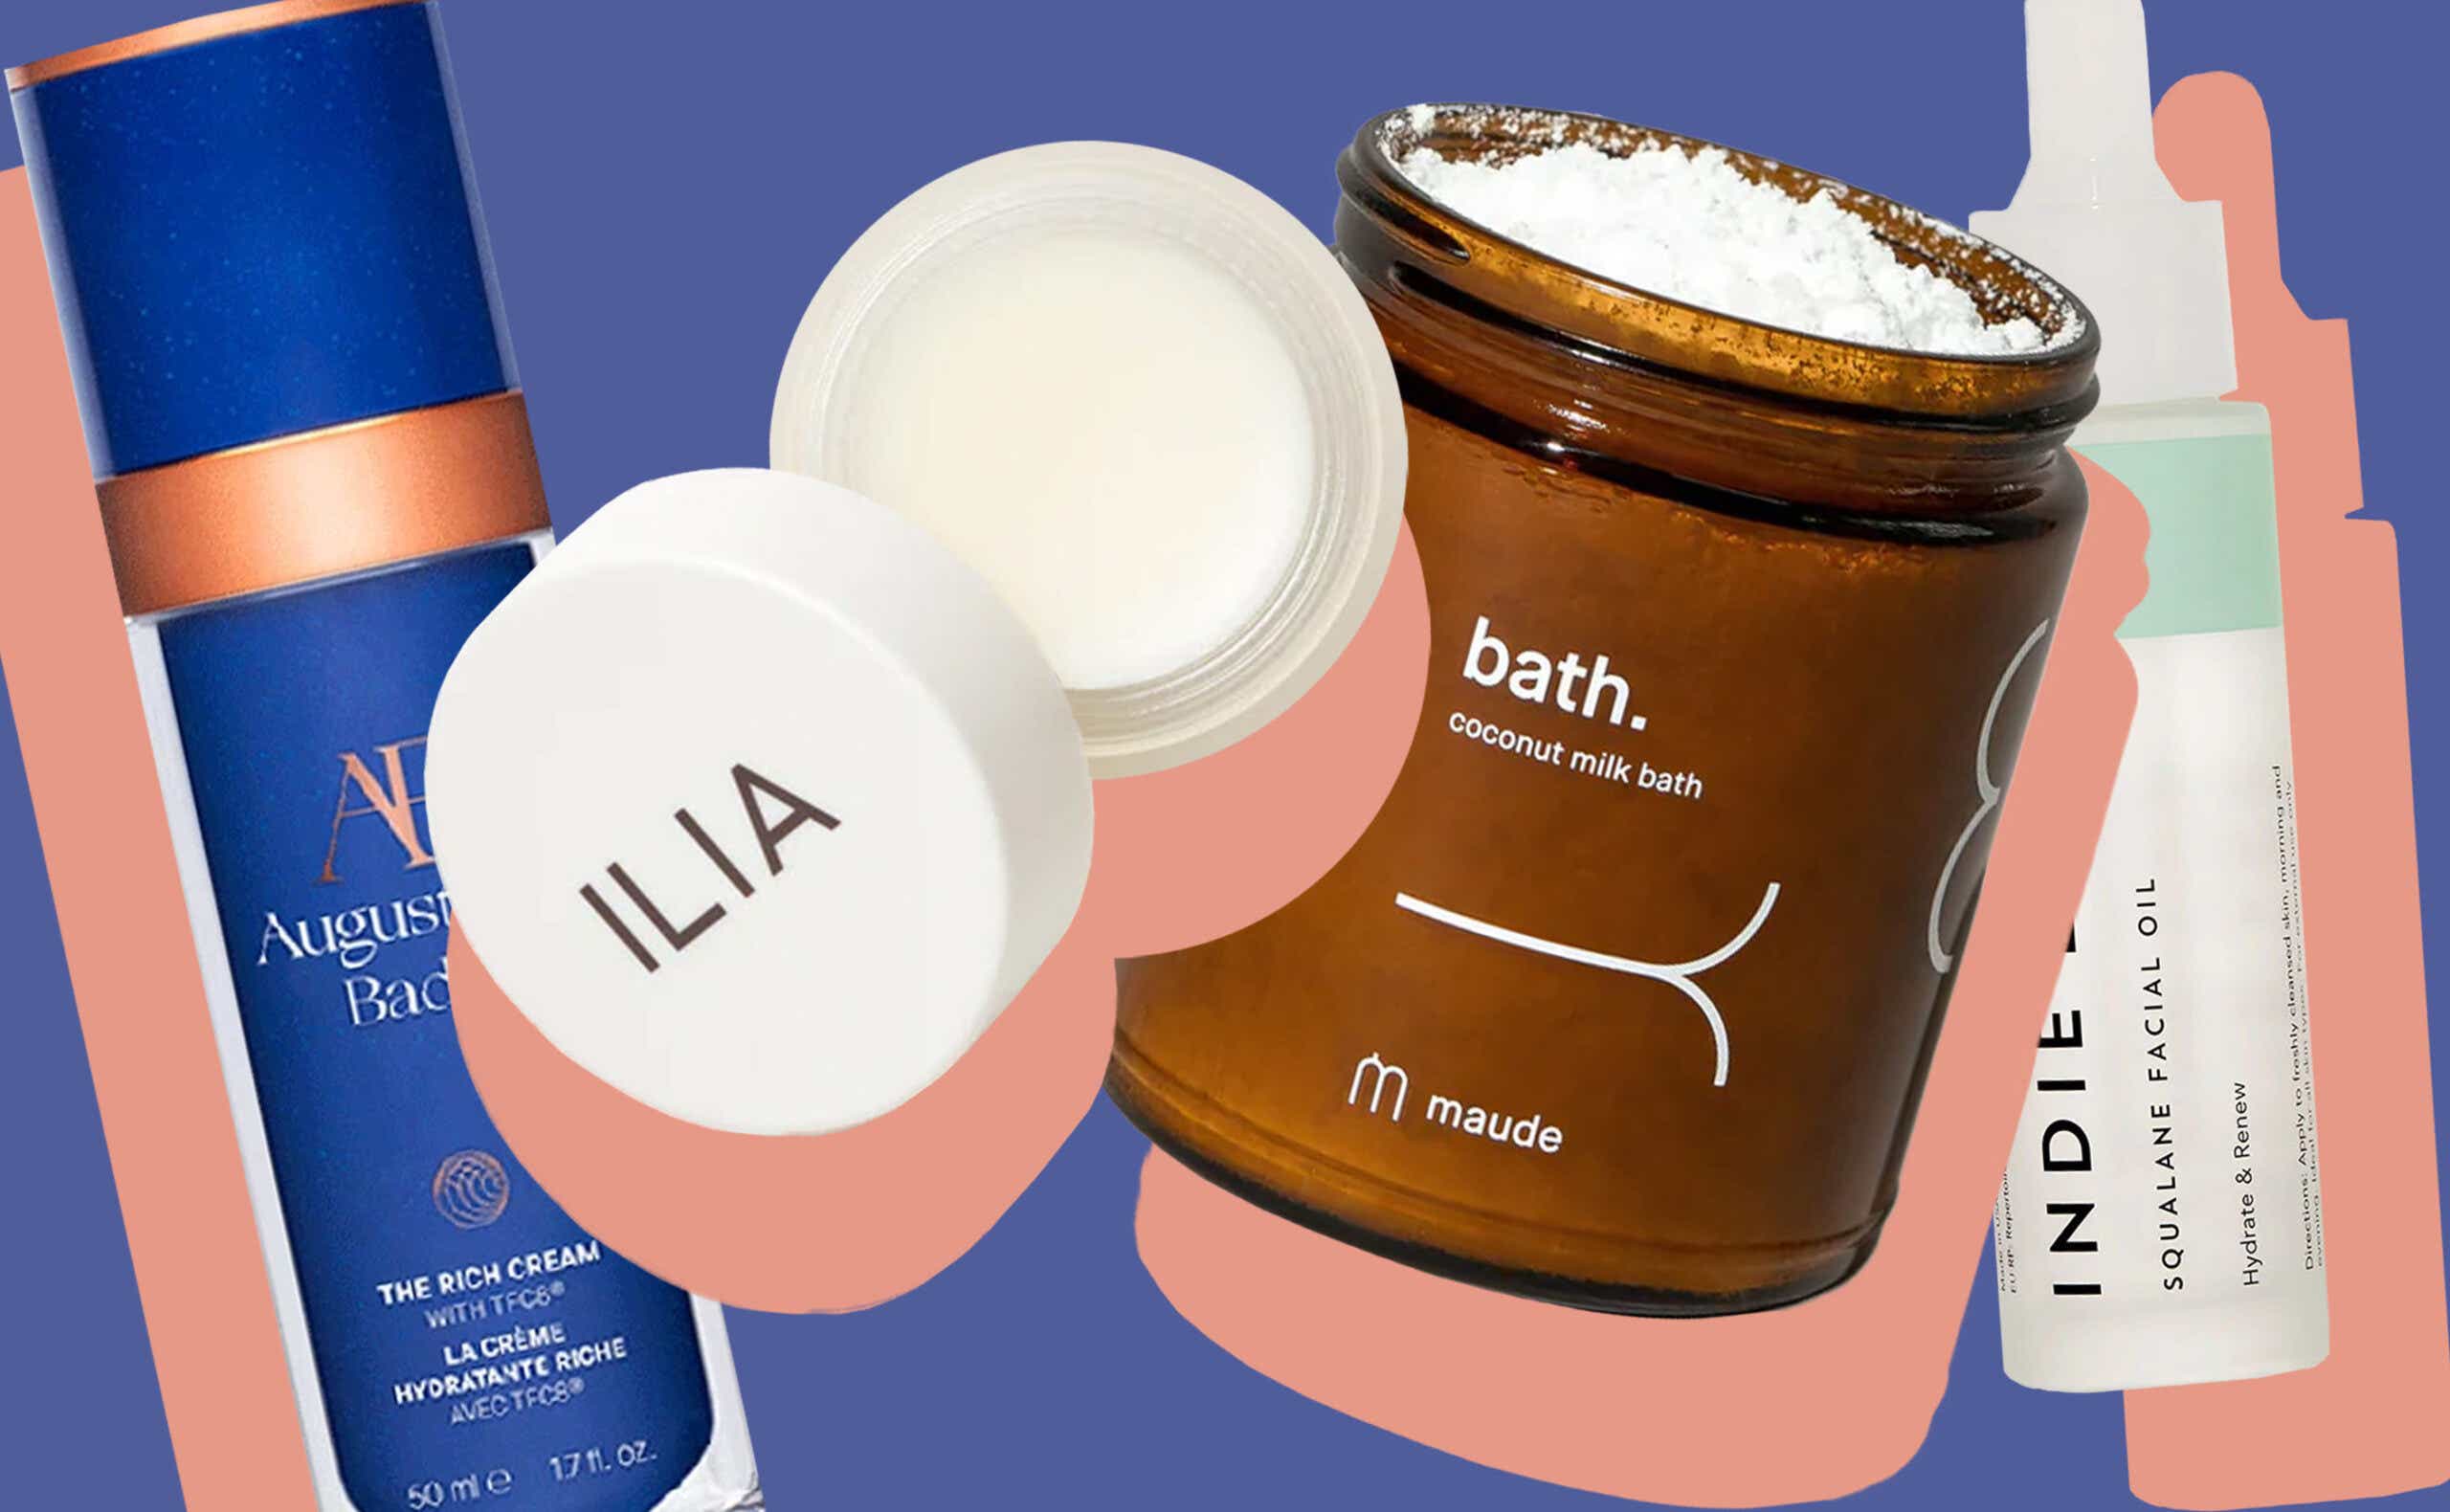 hydrating skincare products